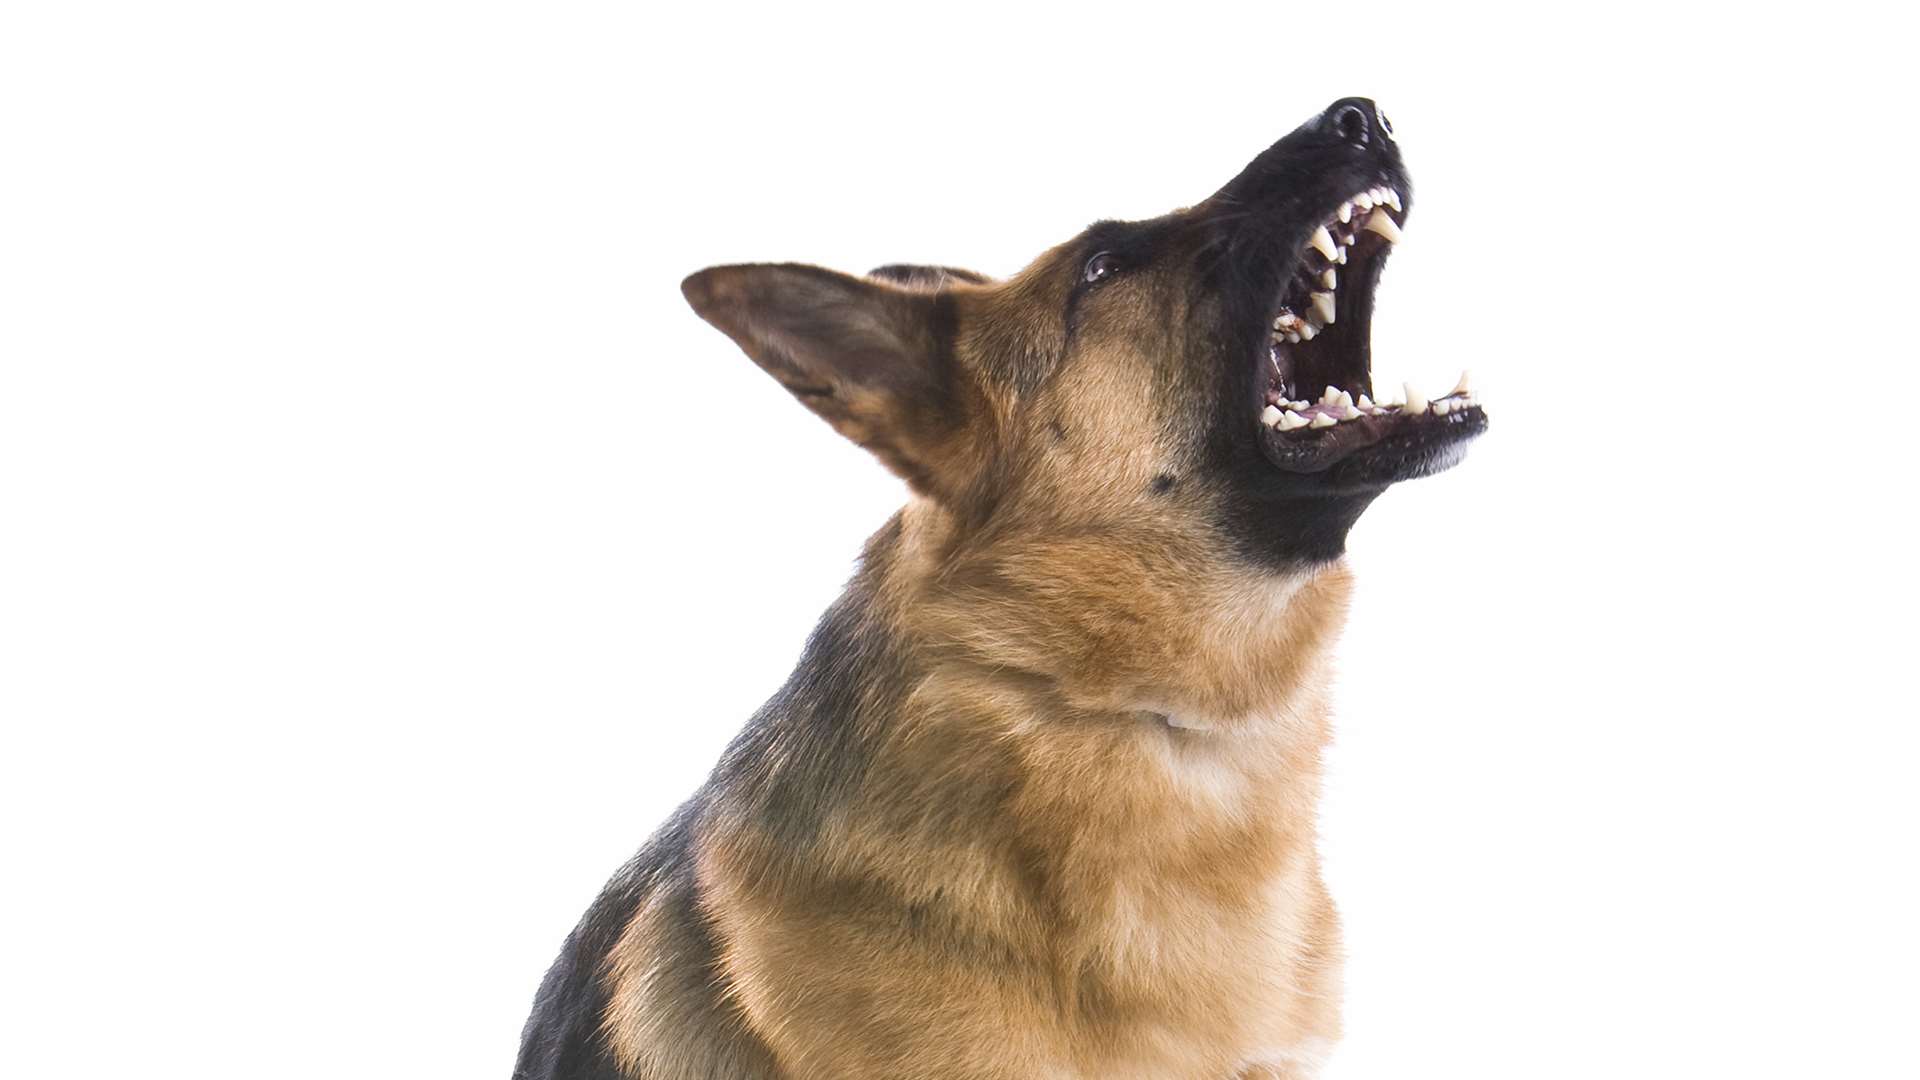 The german shepherd had to be Tasered. Stock image.